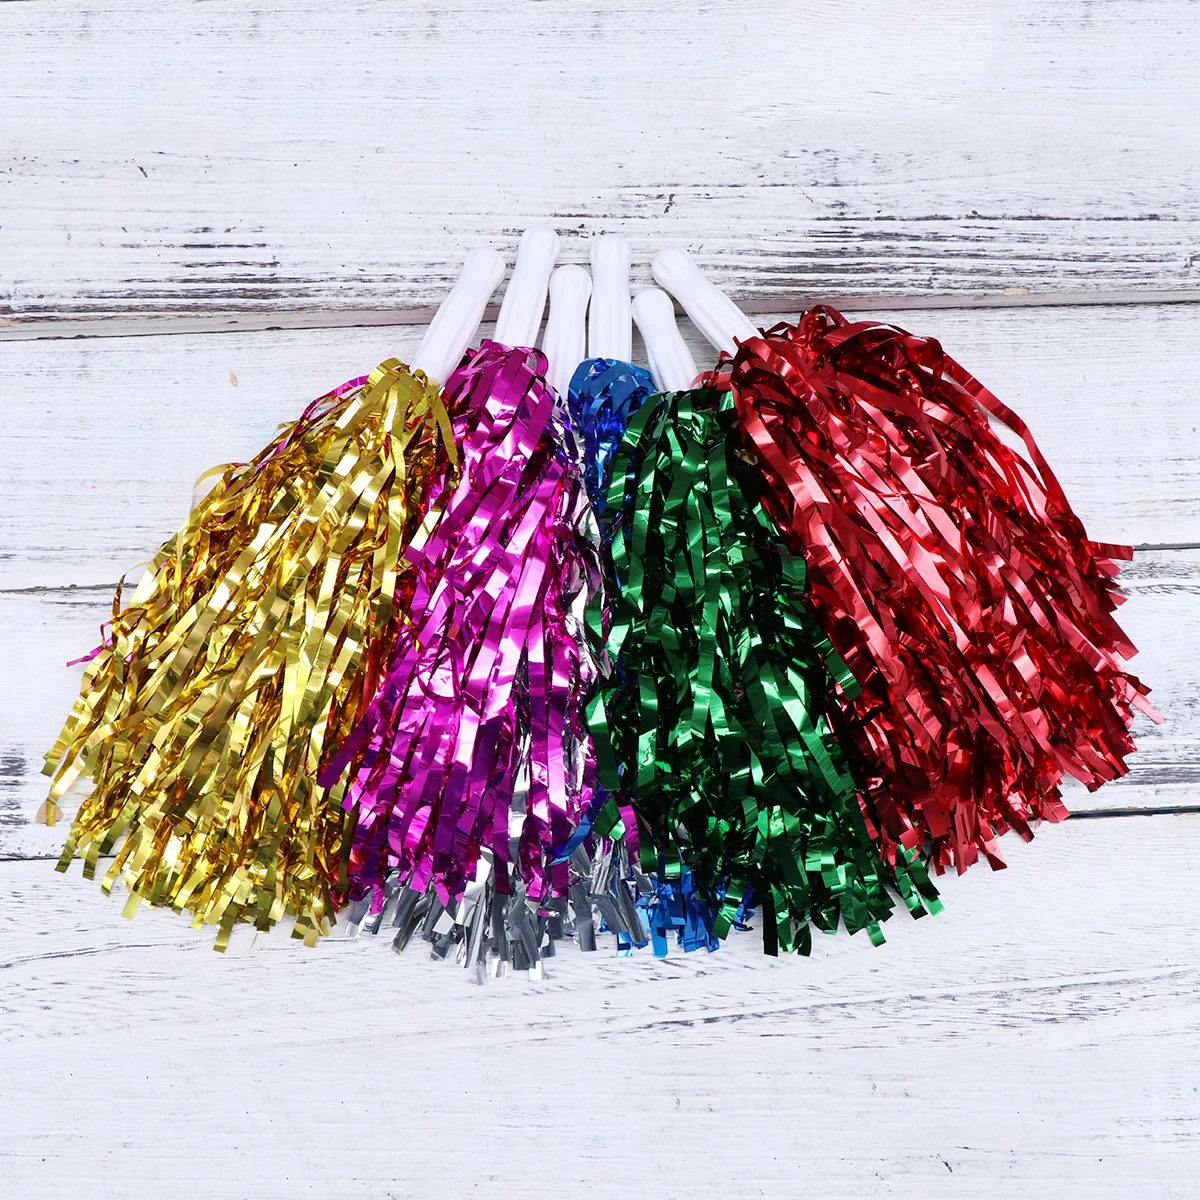 

12pcs Straight Handle Cheering Poms Spirited Fun Cheerleading Kit Cheer Props for Performance Competition Cheering Sports Events